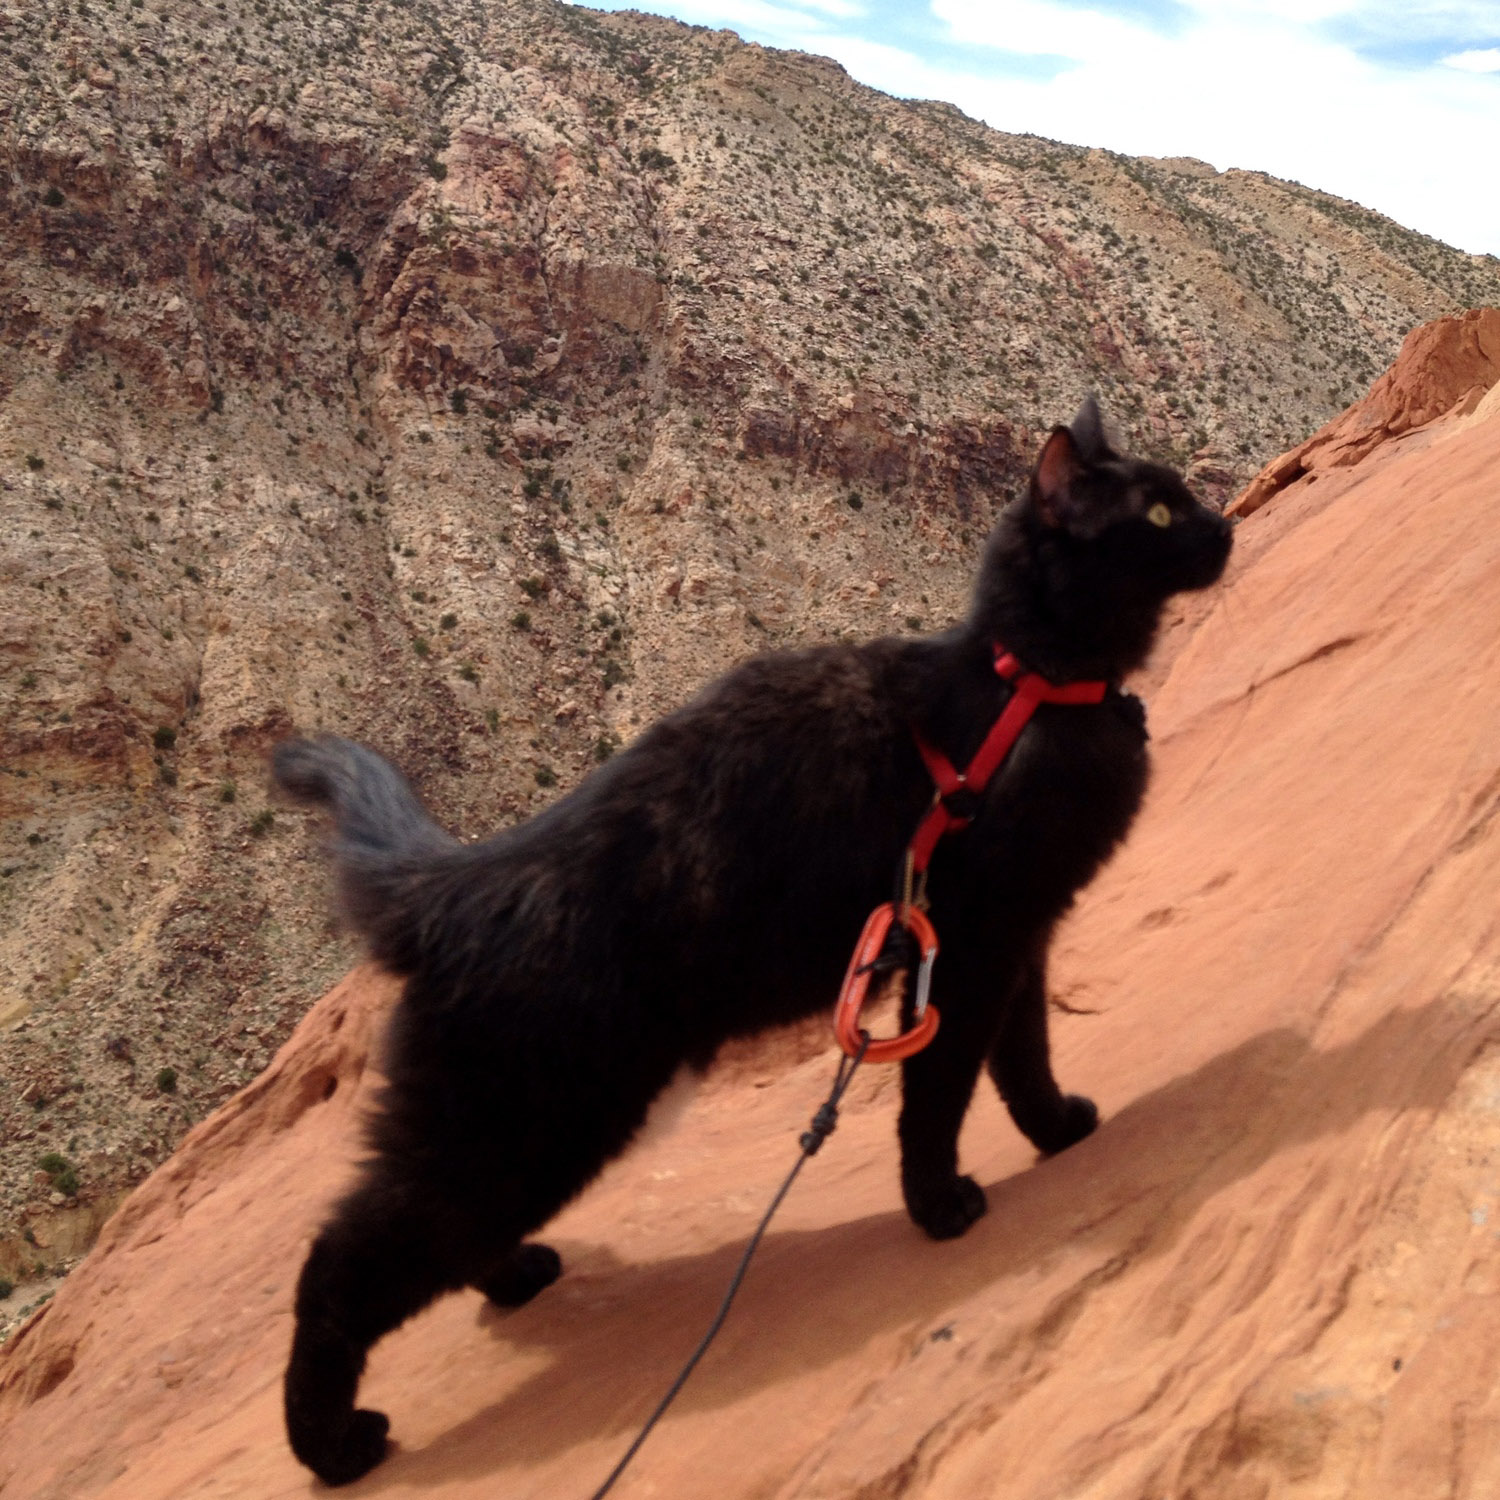 Craig Armstrong frequently takes his cat, Millie, climbing in Utah.